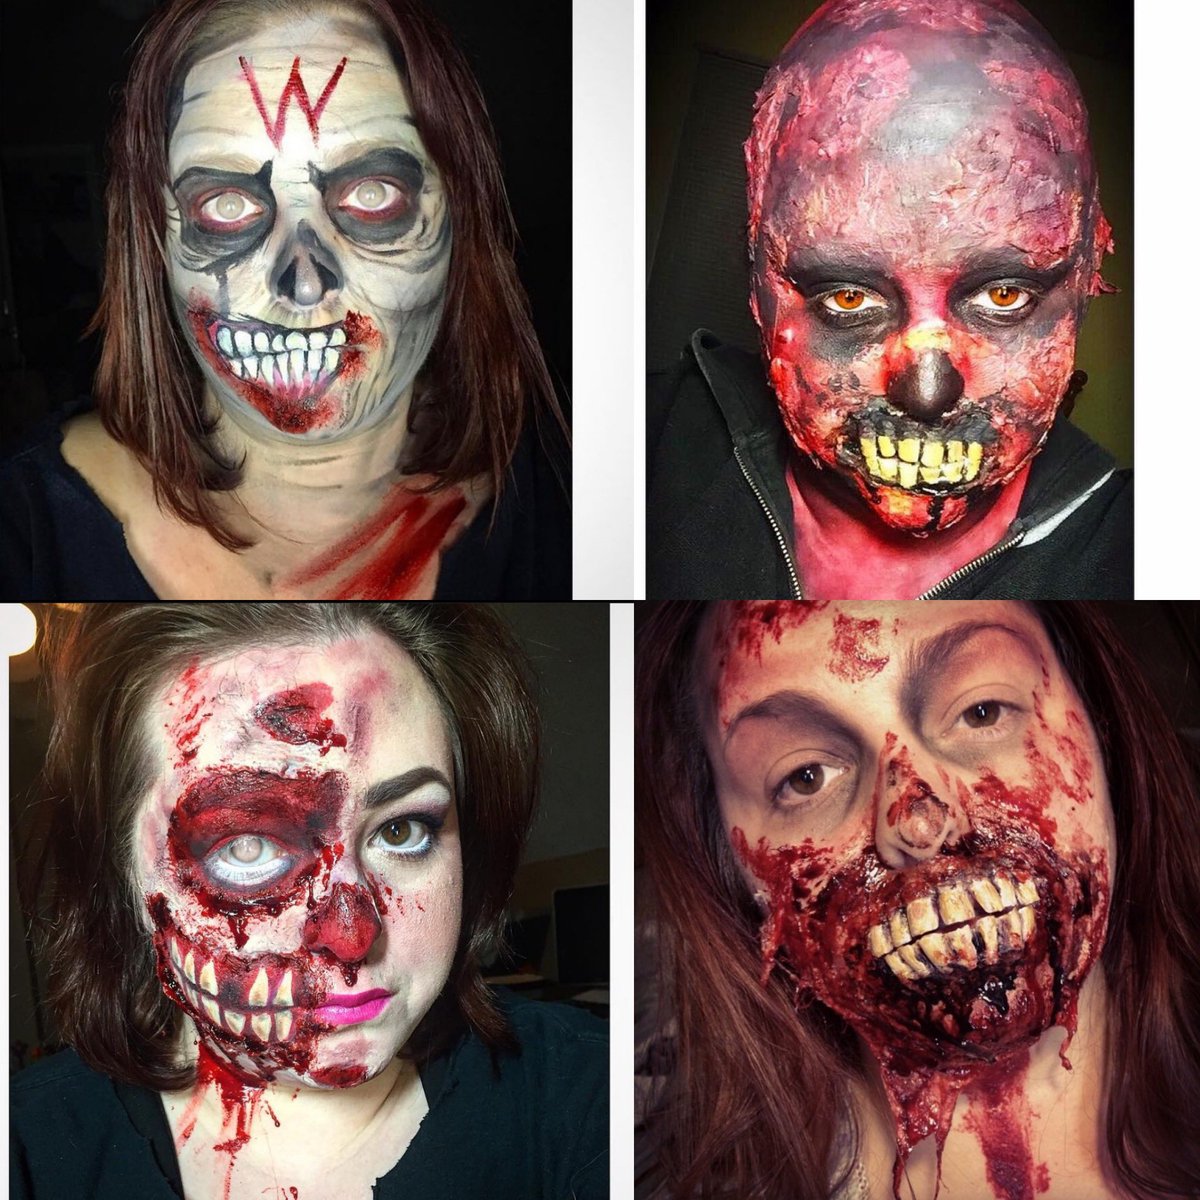 Zombie makeups from the past. The zombiefied post had me inspired to share. It’s been a minute since I’ve done a gory zombie look on myself. 

#mua #makeupartist #sfxmakeup